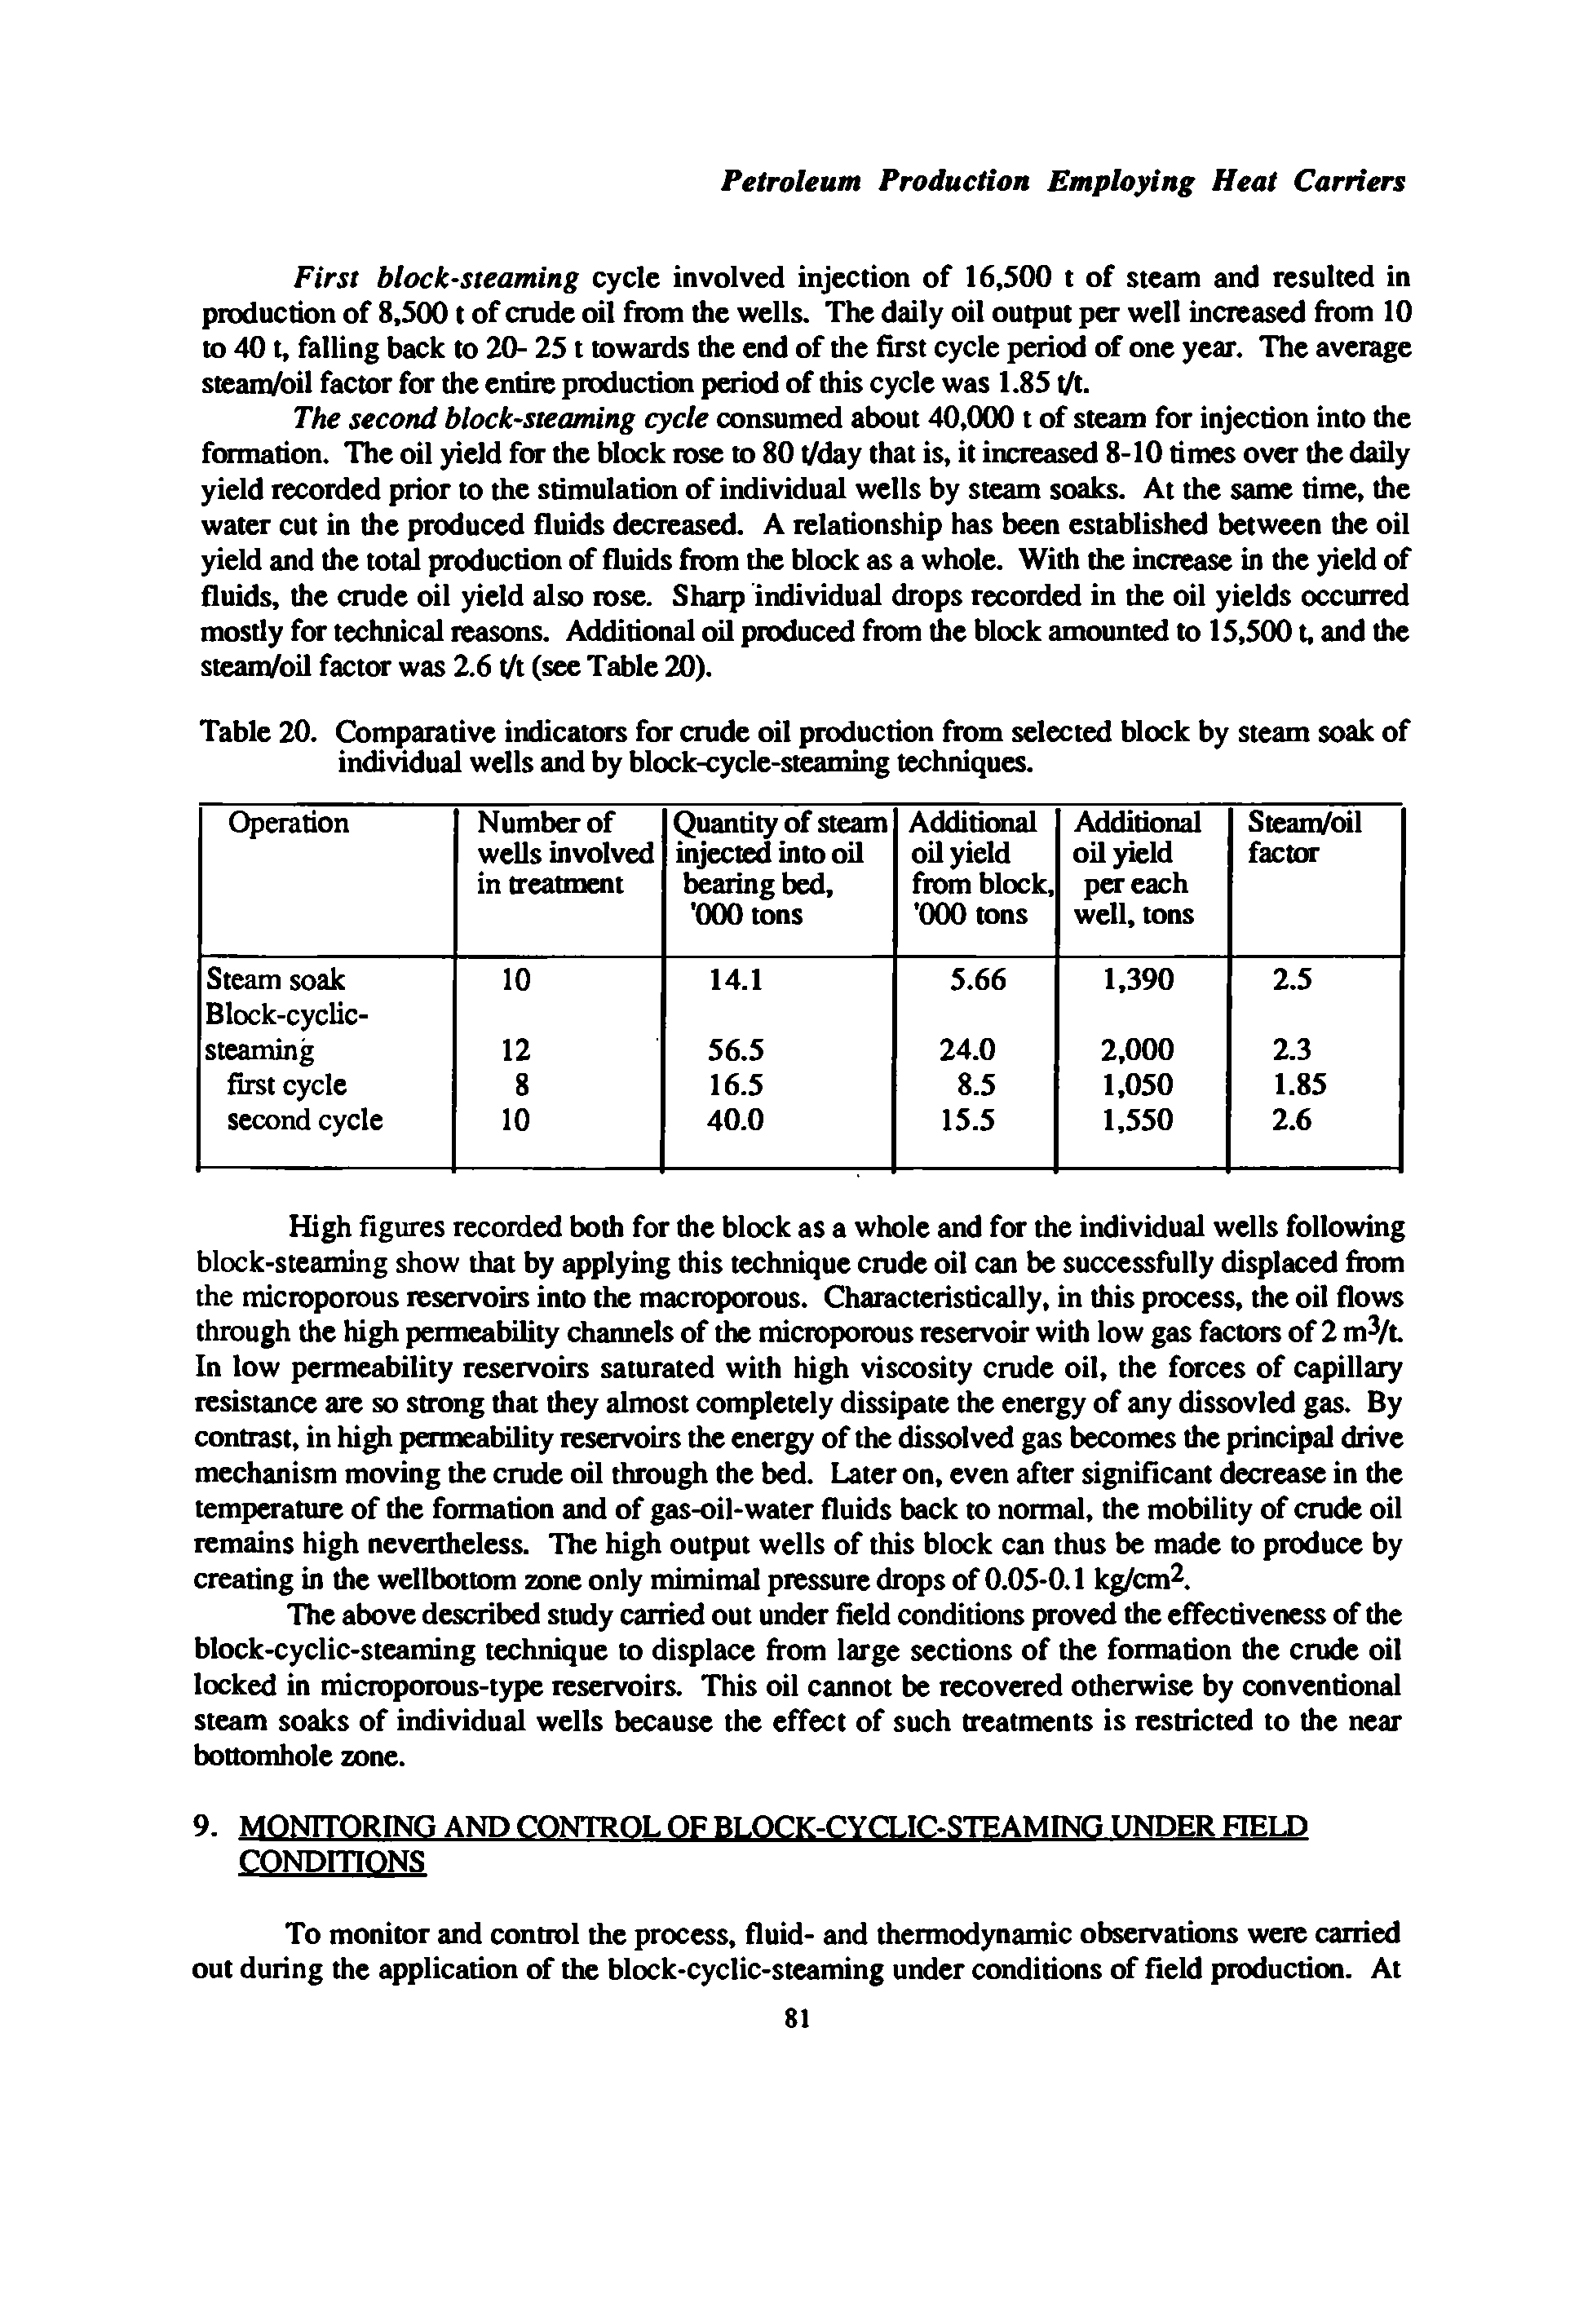 Table 20. Comparative indicators for crude oil production from selected block by steam soak of individual wells and by block-cycle-steaming techniques.